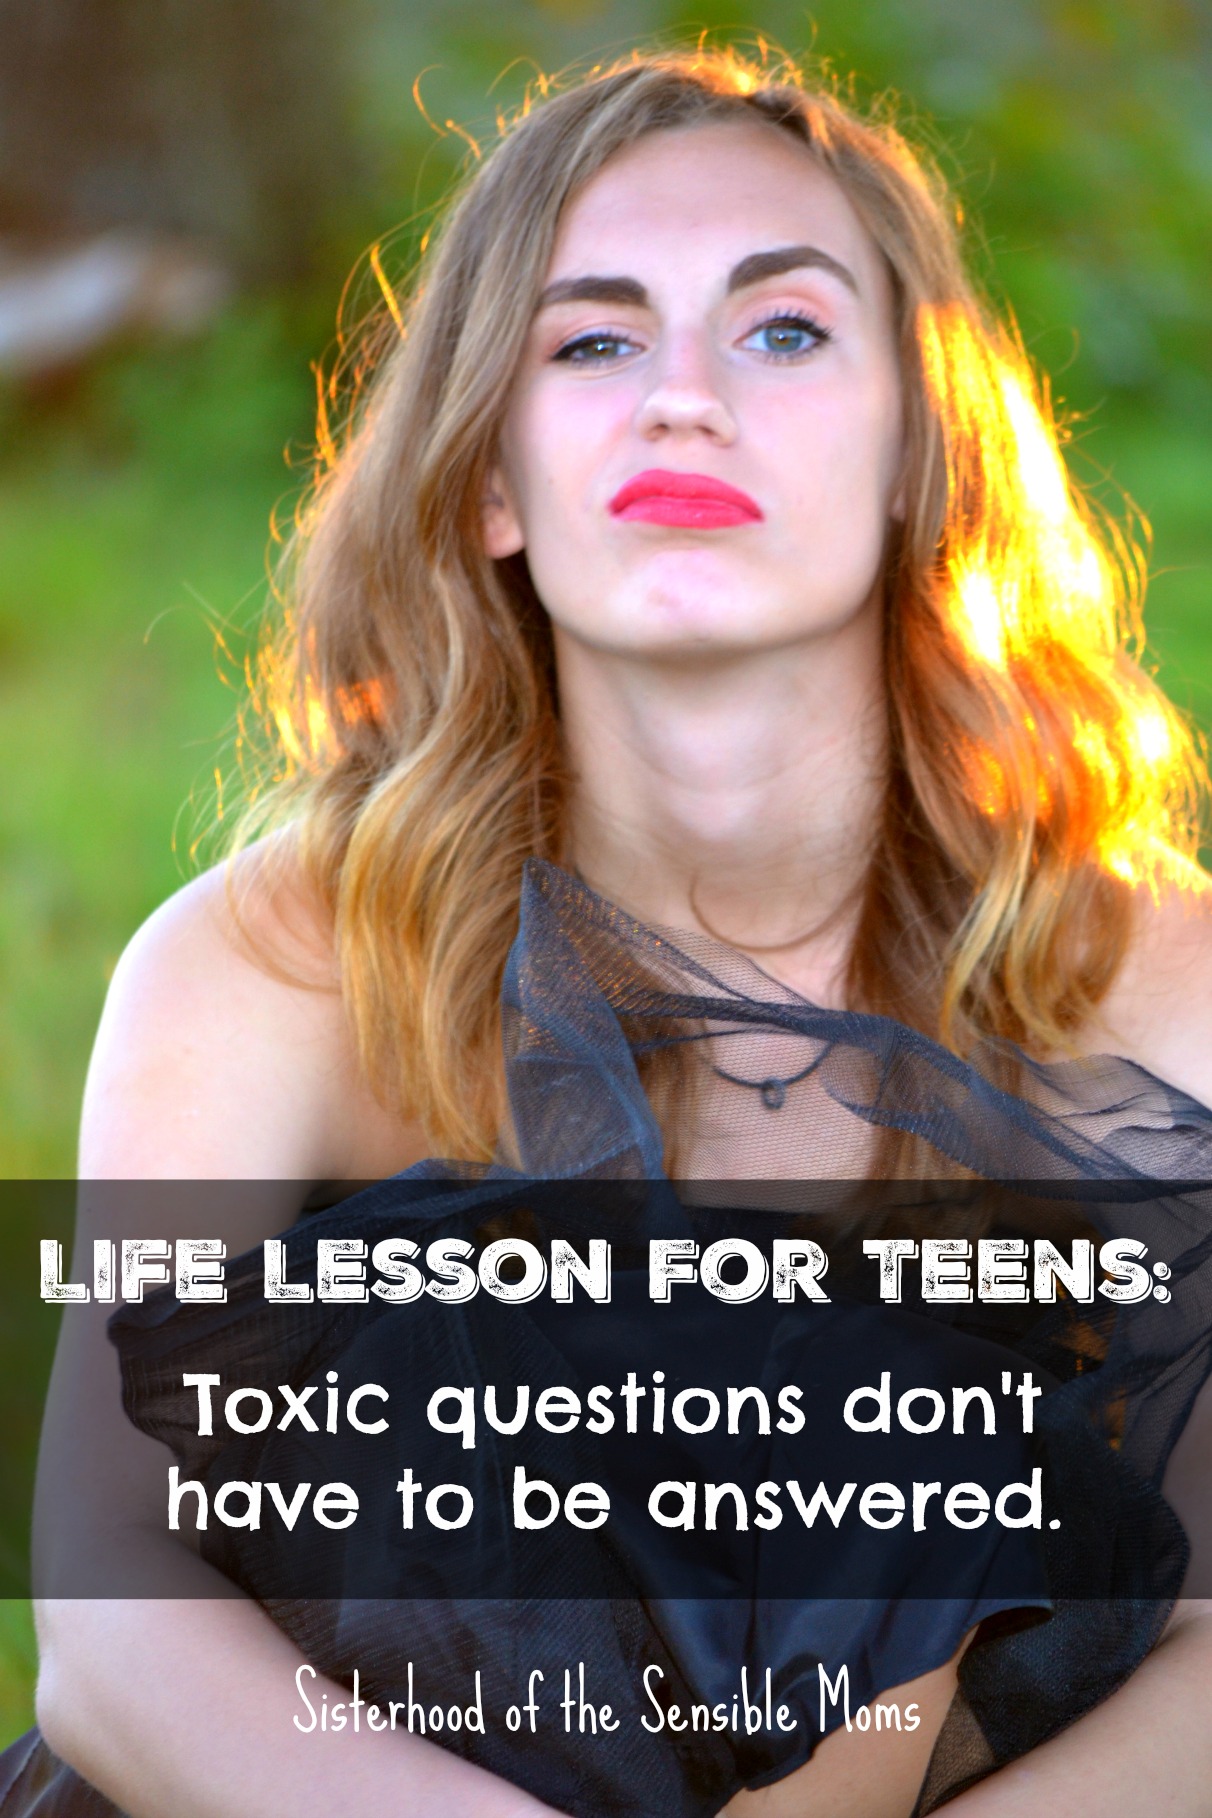 Life Lessons for Teens (and us all): Toxic Questions Don't Have to Be Answered. Here's what to do when you're put on the spot.| Parenting Advice | College | Sisterhood of the Sensible Moms